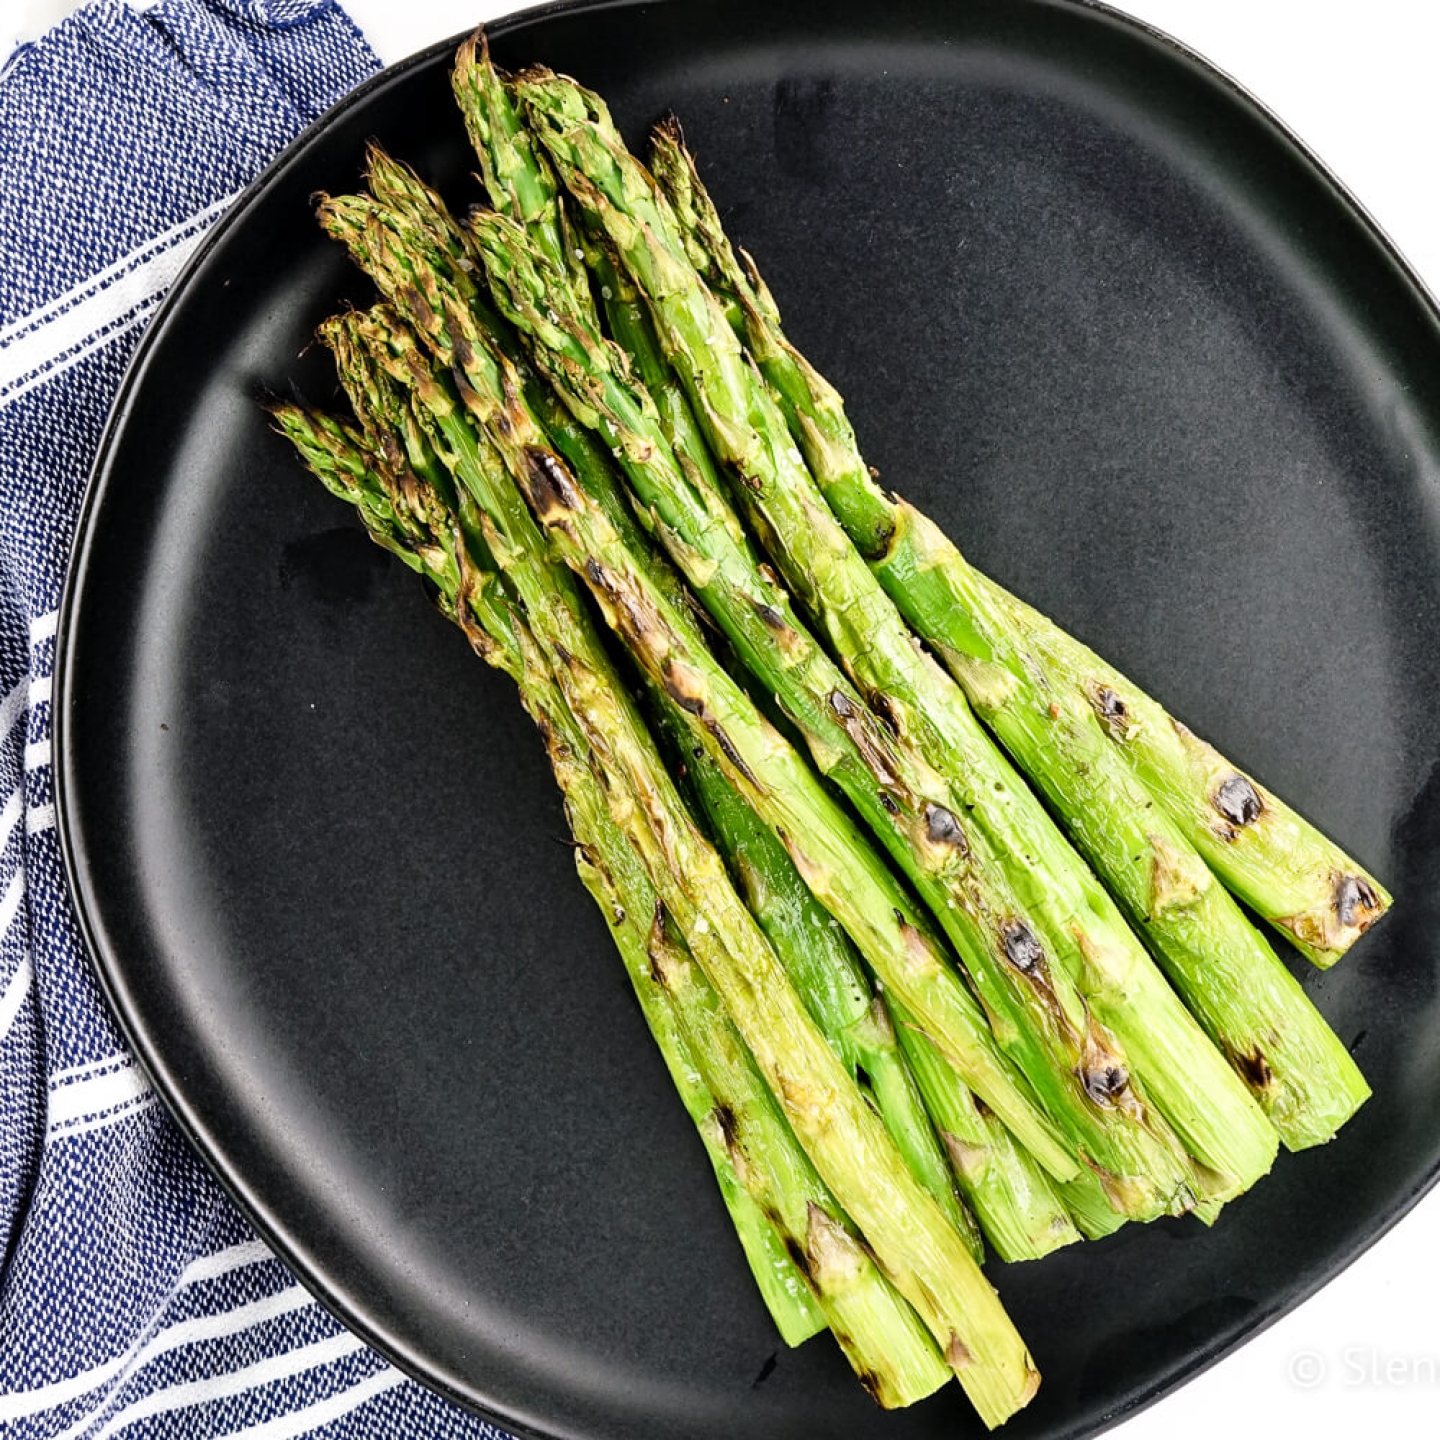 Grilled asparagus with olive oil, salt, and pepper on a black plate.